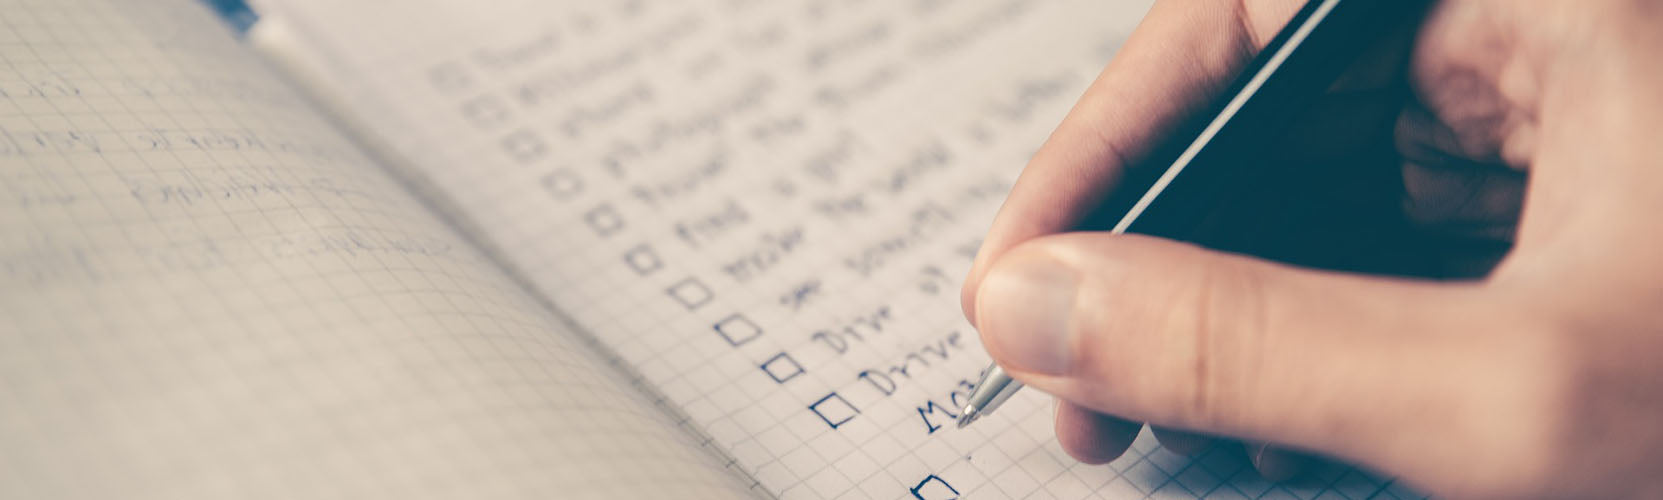 Assistive Technology Inventory Checklist